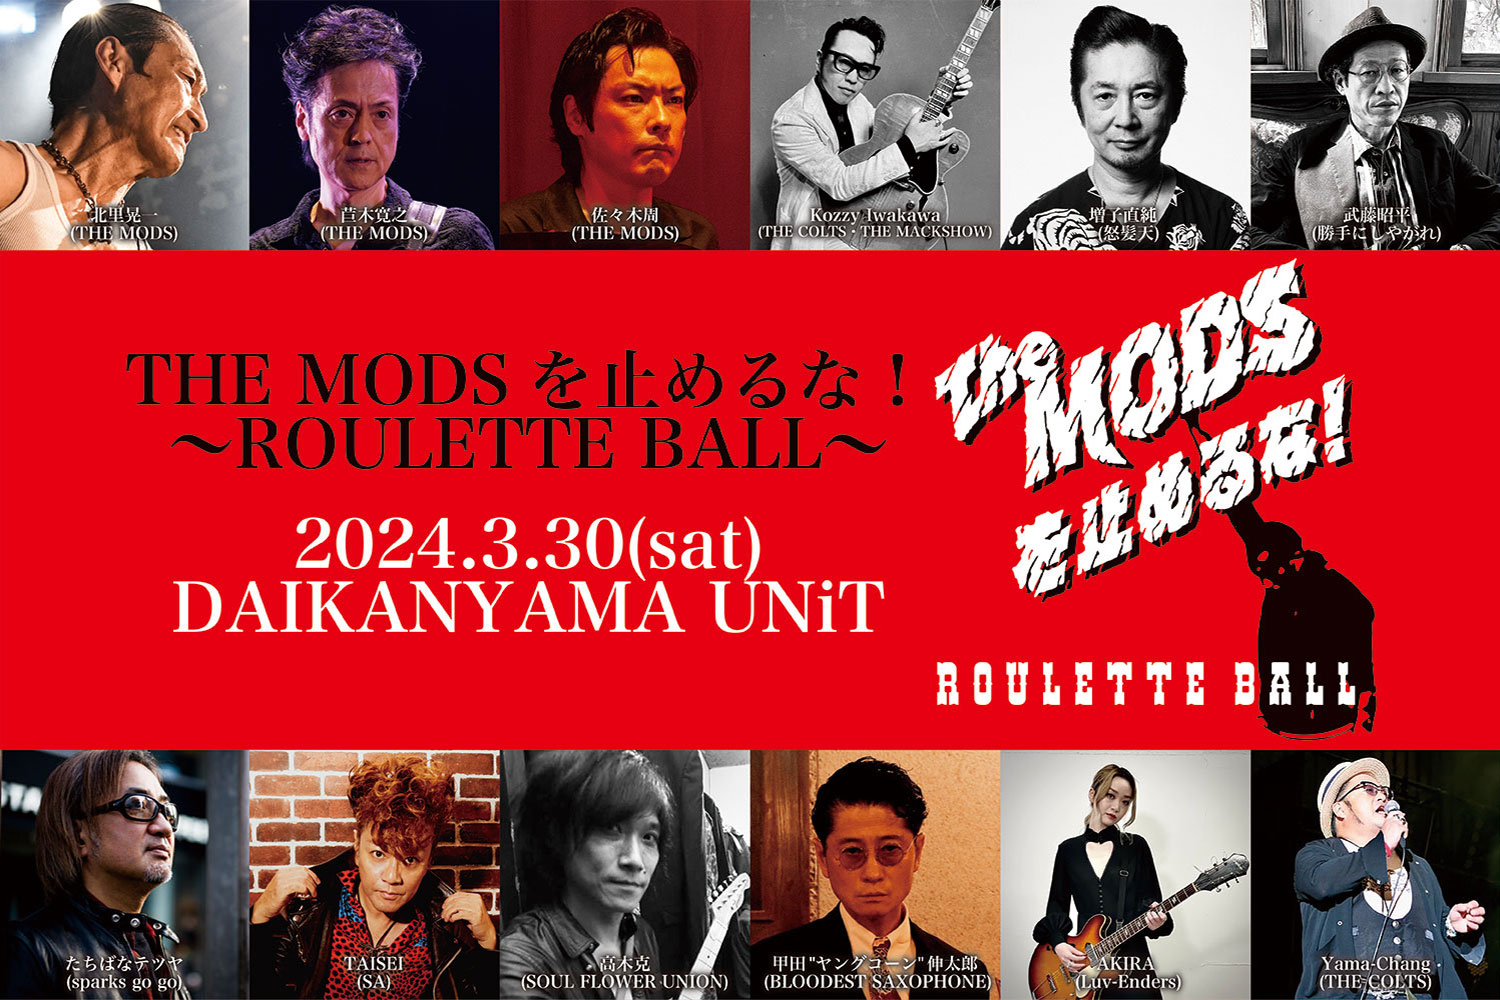 THE MODSを止めるな！〜Roulette Ball〜 2024/3/30開催決定！ ｜ THE